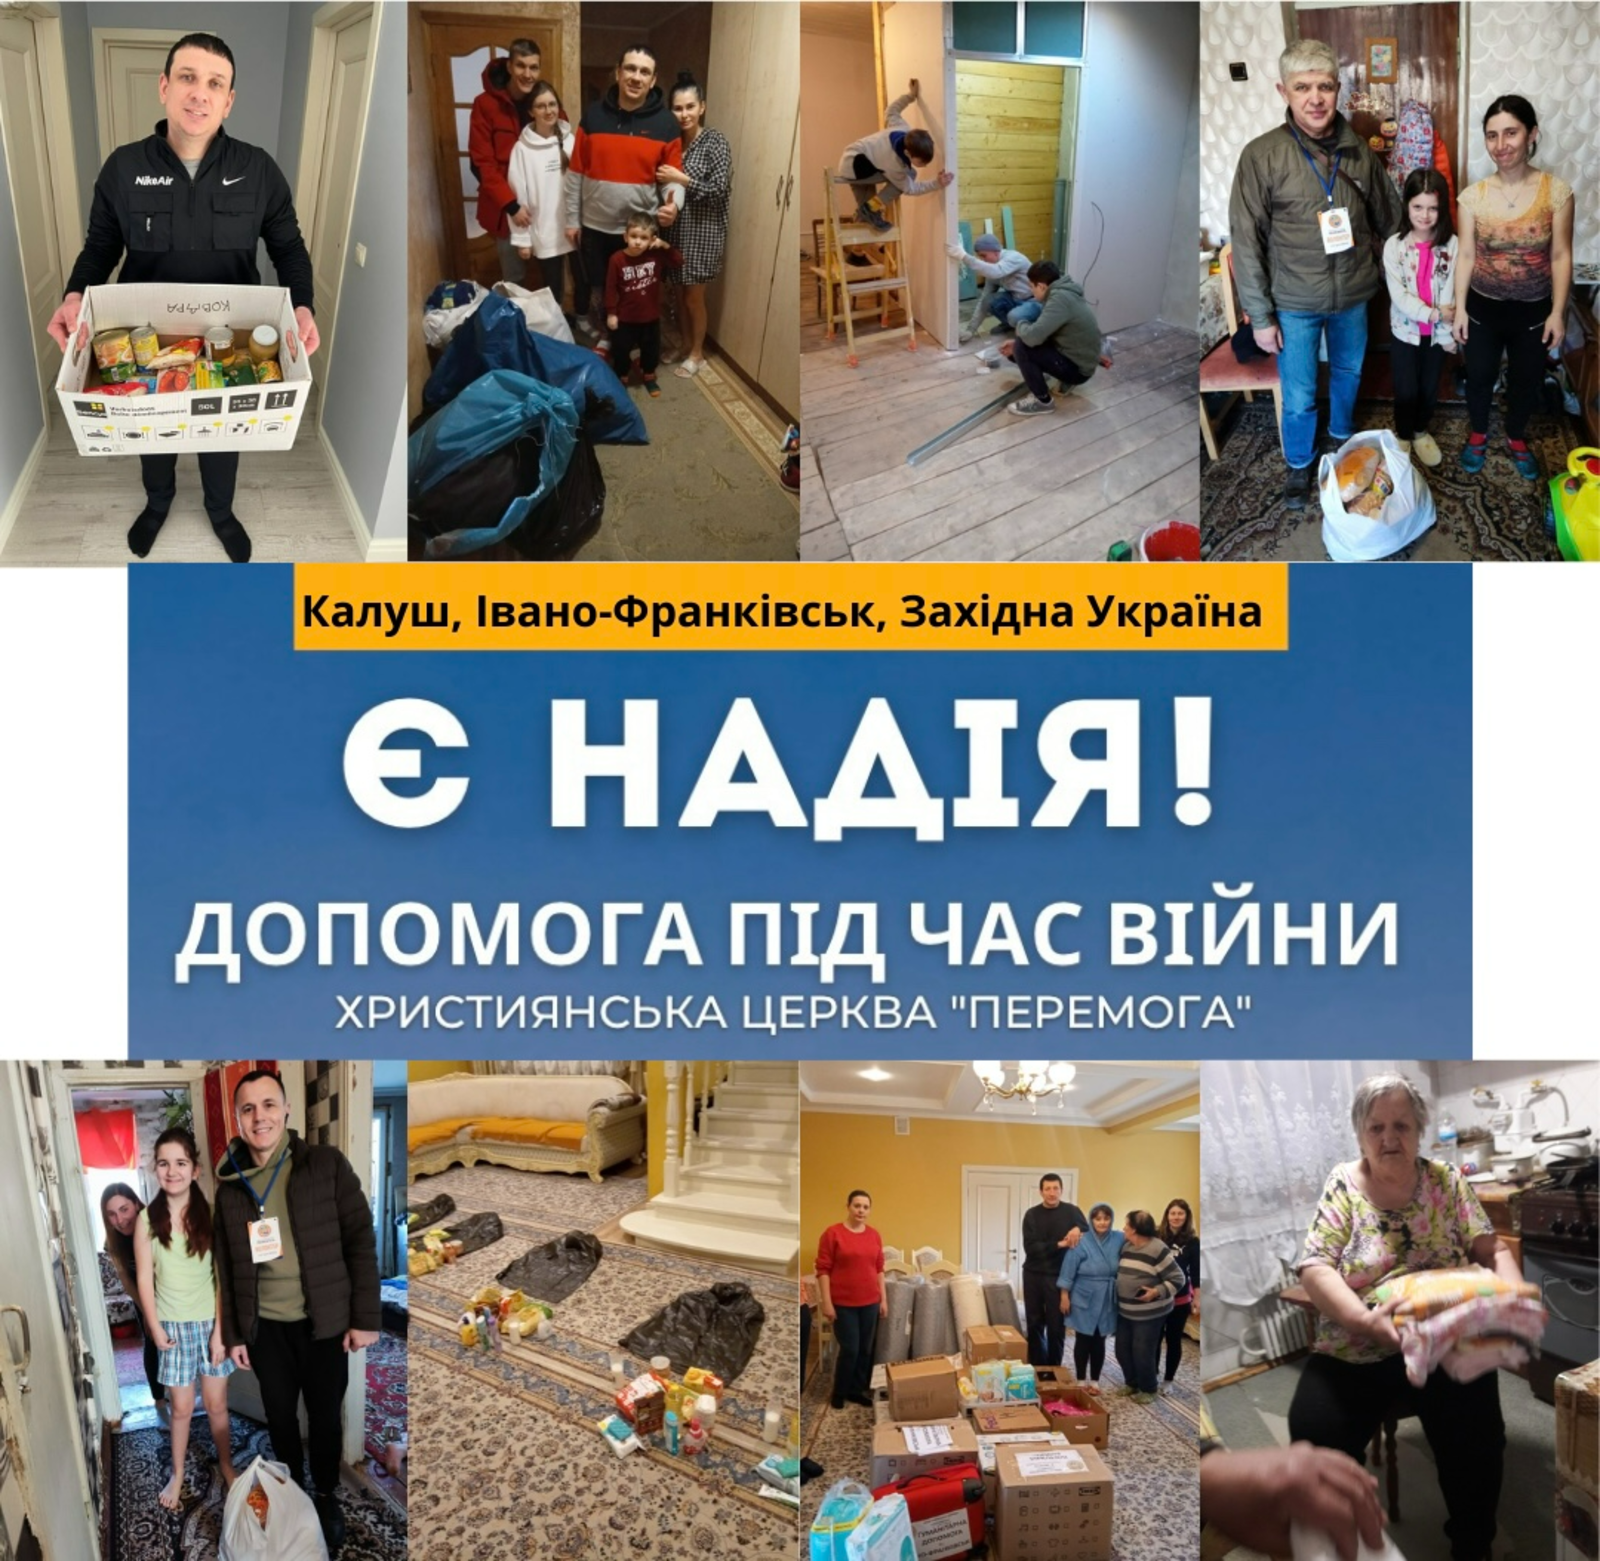 “THERE IS HOPE - HELP IN WARTIME IN WESTERN UKRAINE” project